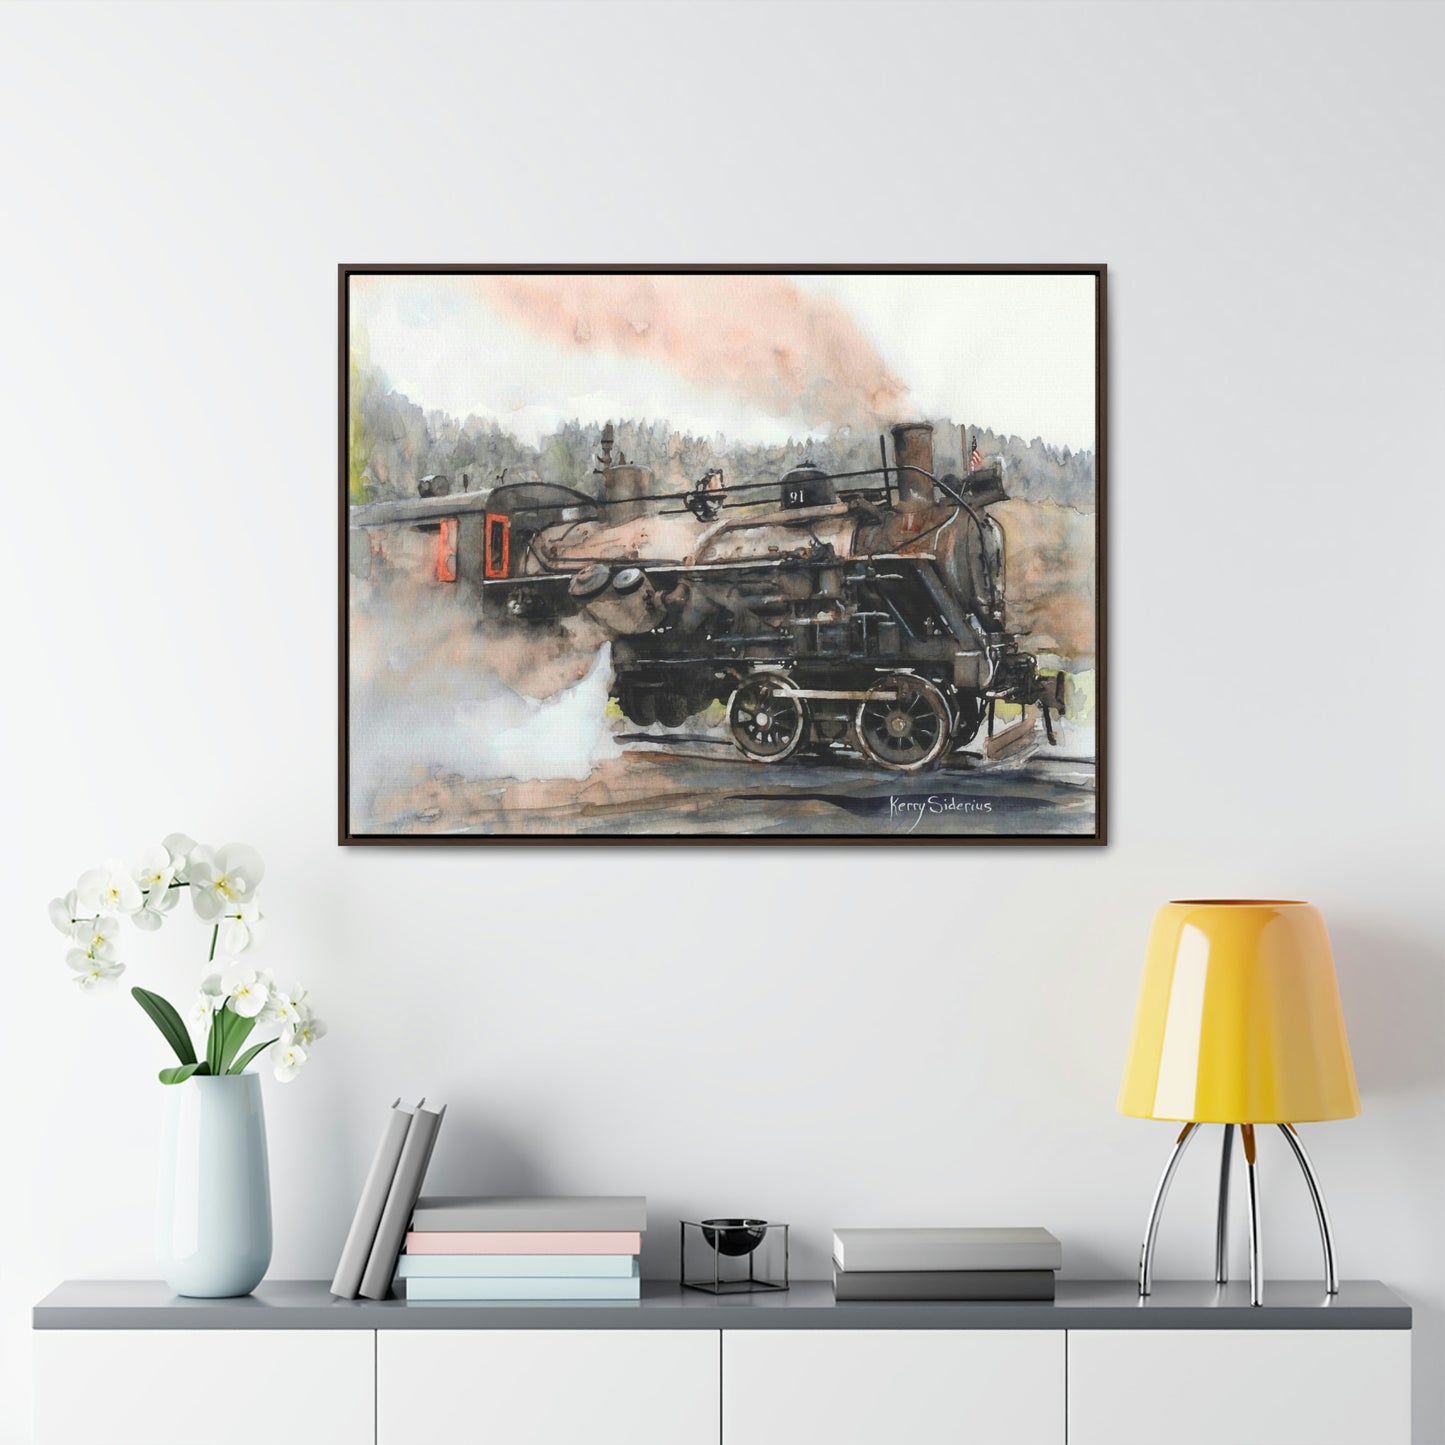 "Old Steam Train in Elba, Washington" Gallery-Wrapped Wood Framed Canvas - Kerry Siderius Art 